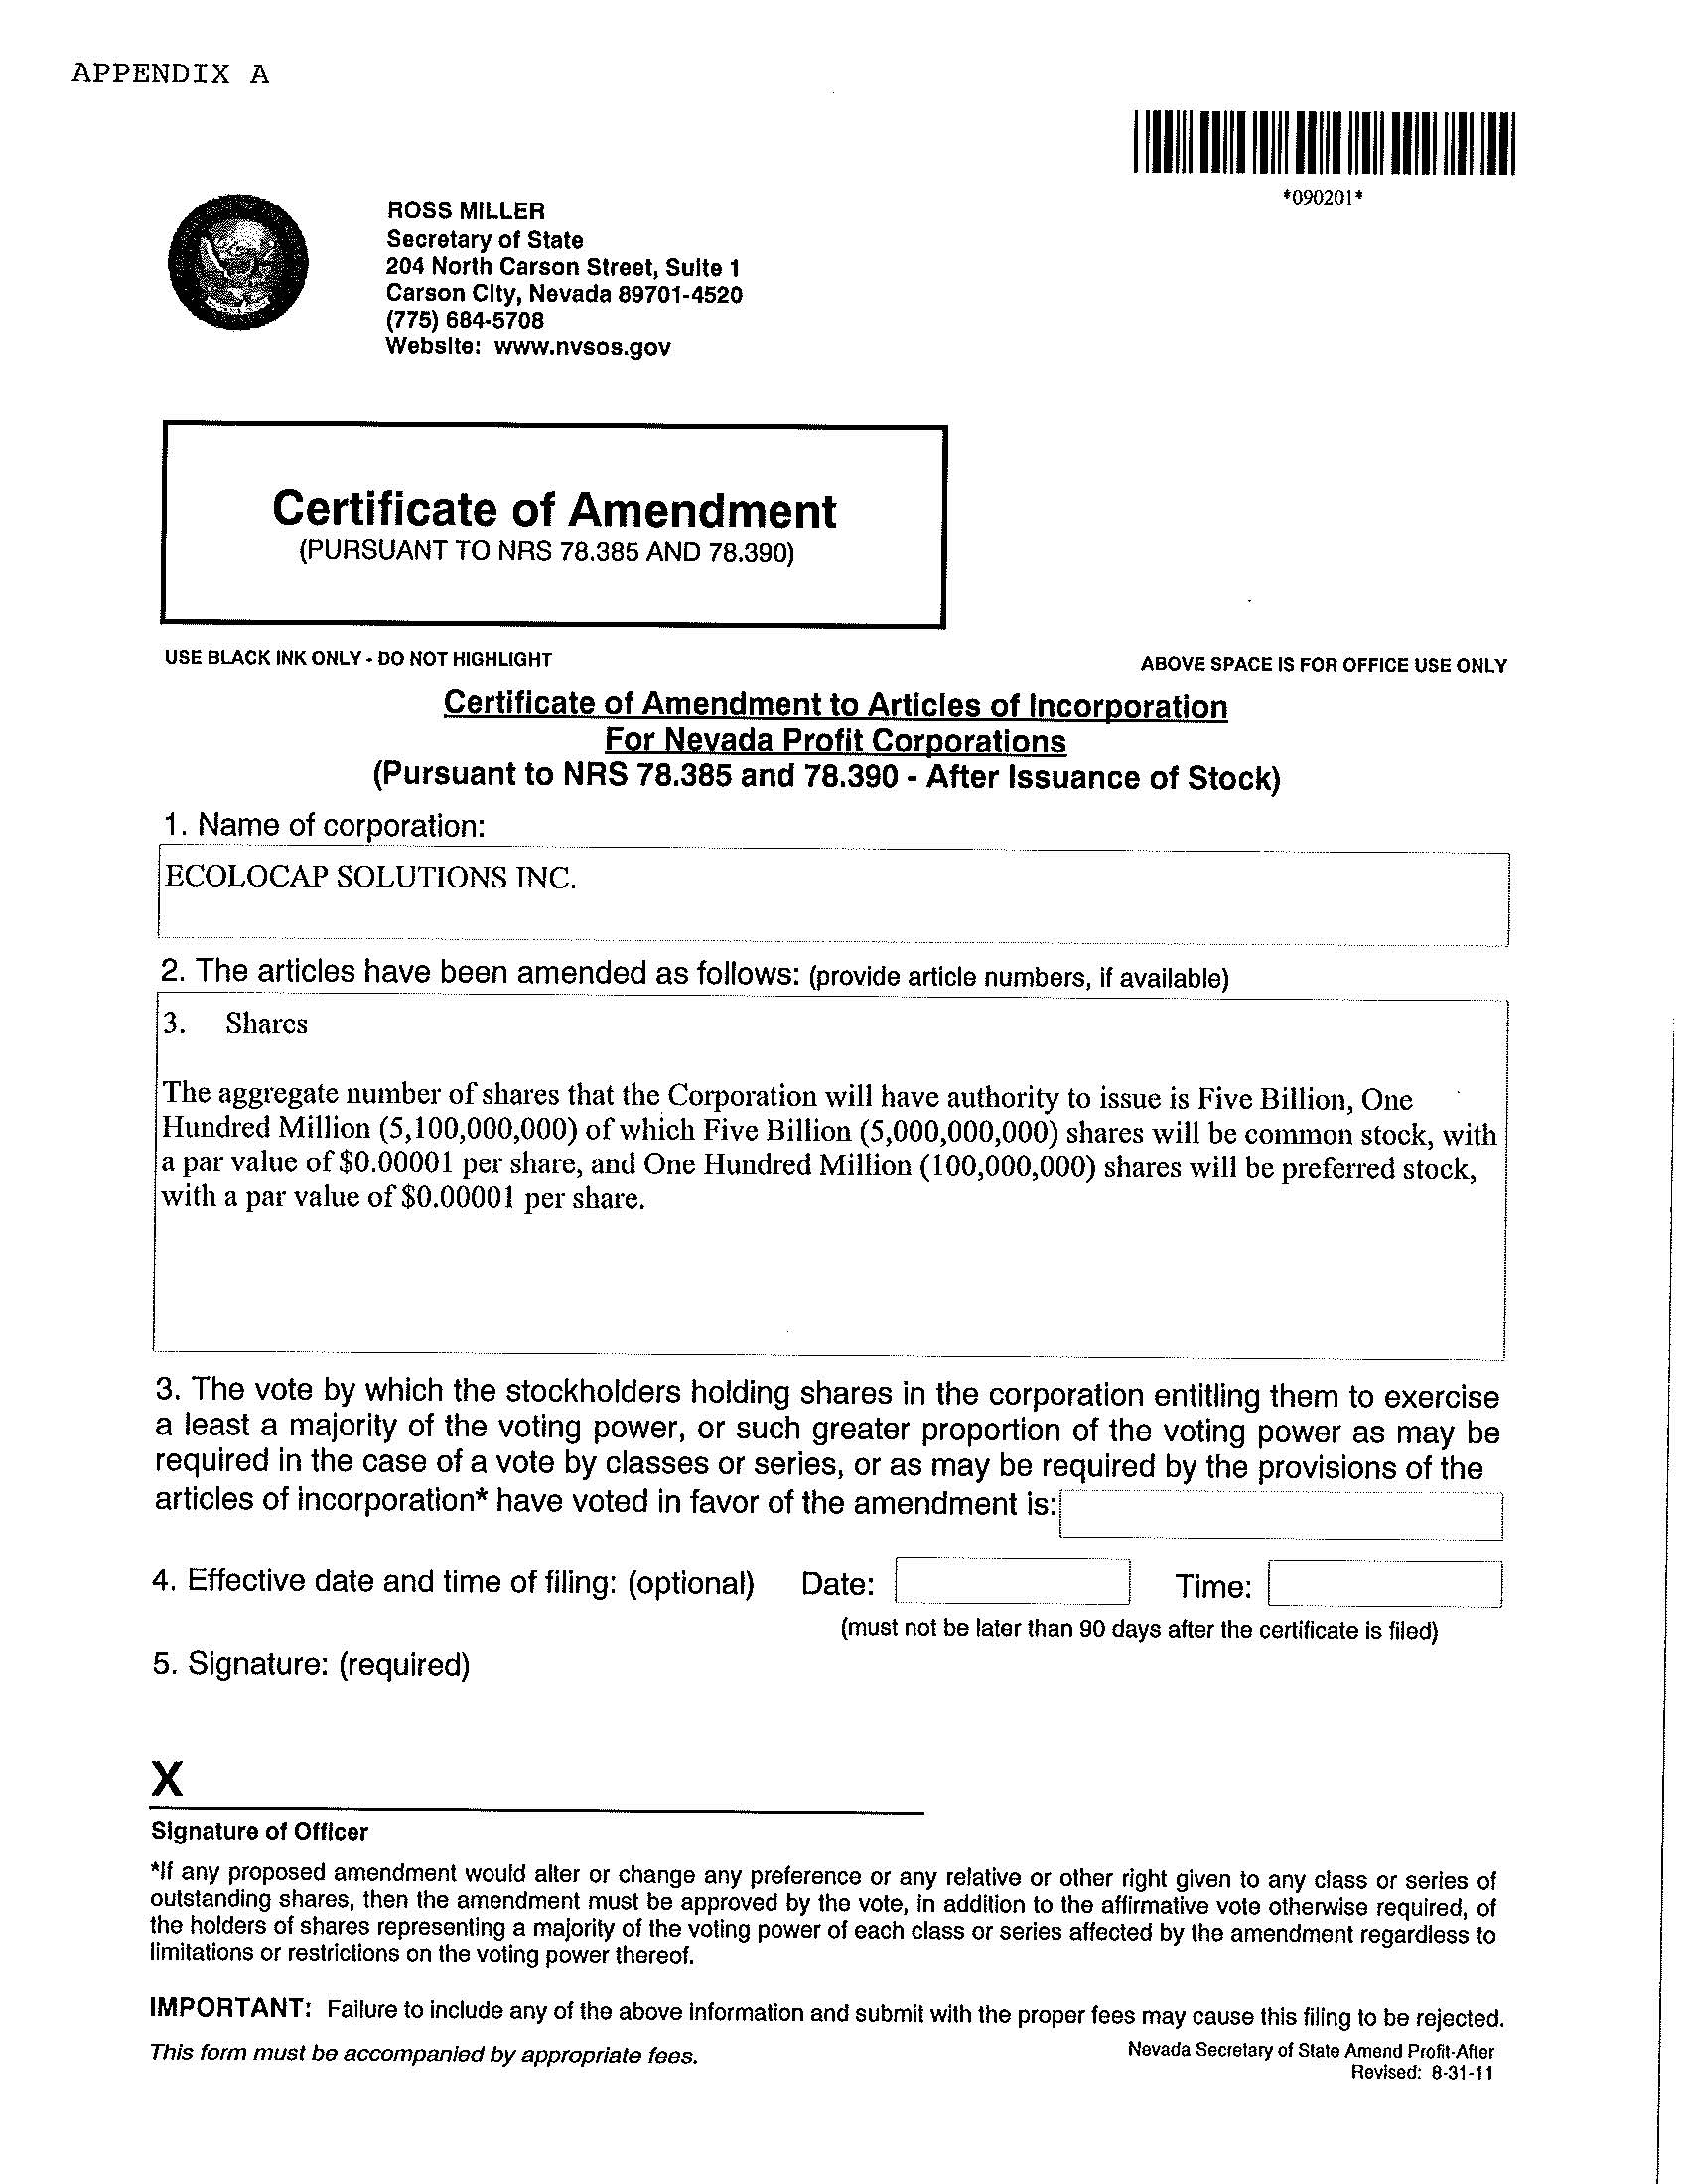 Certificate of Amended Articles of Incorporation.